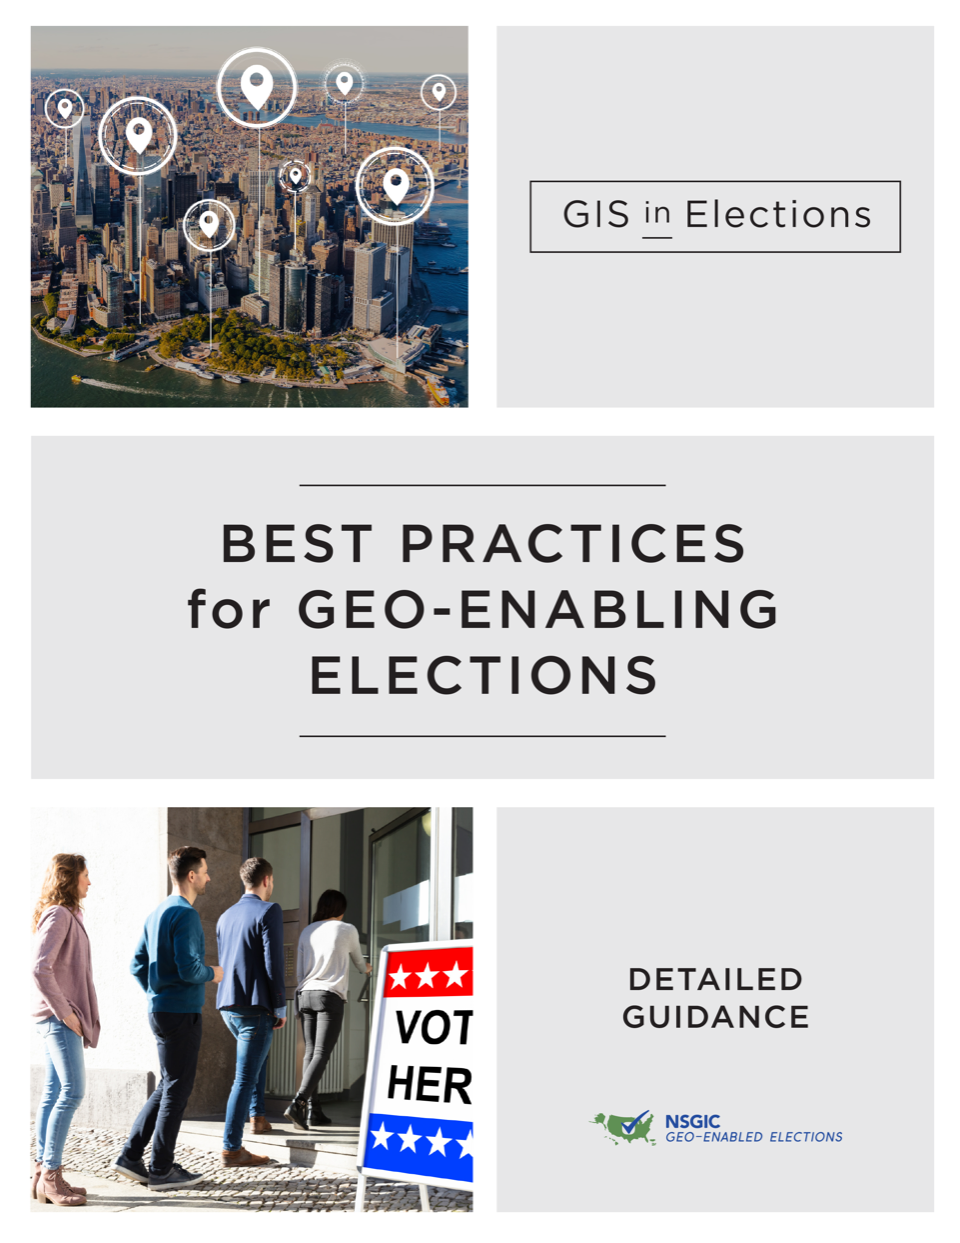 Best Practices for geo-enabled elections graphic